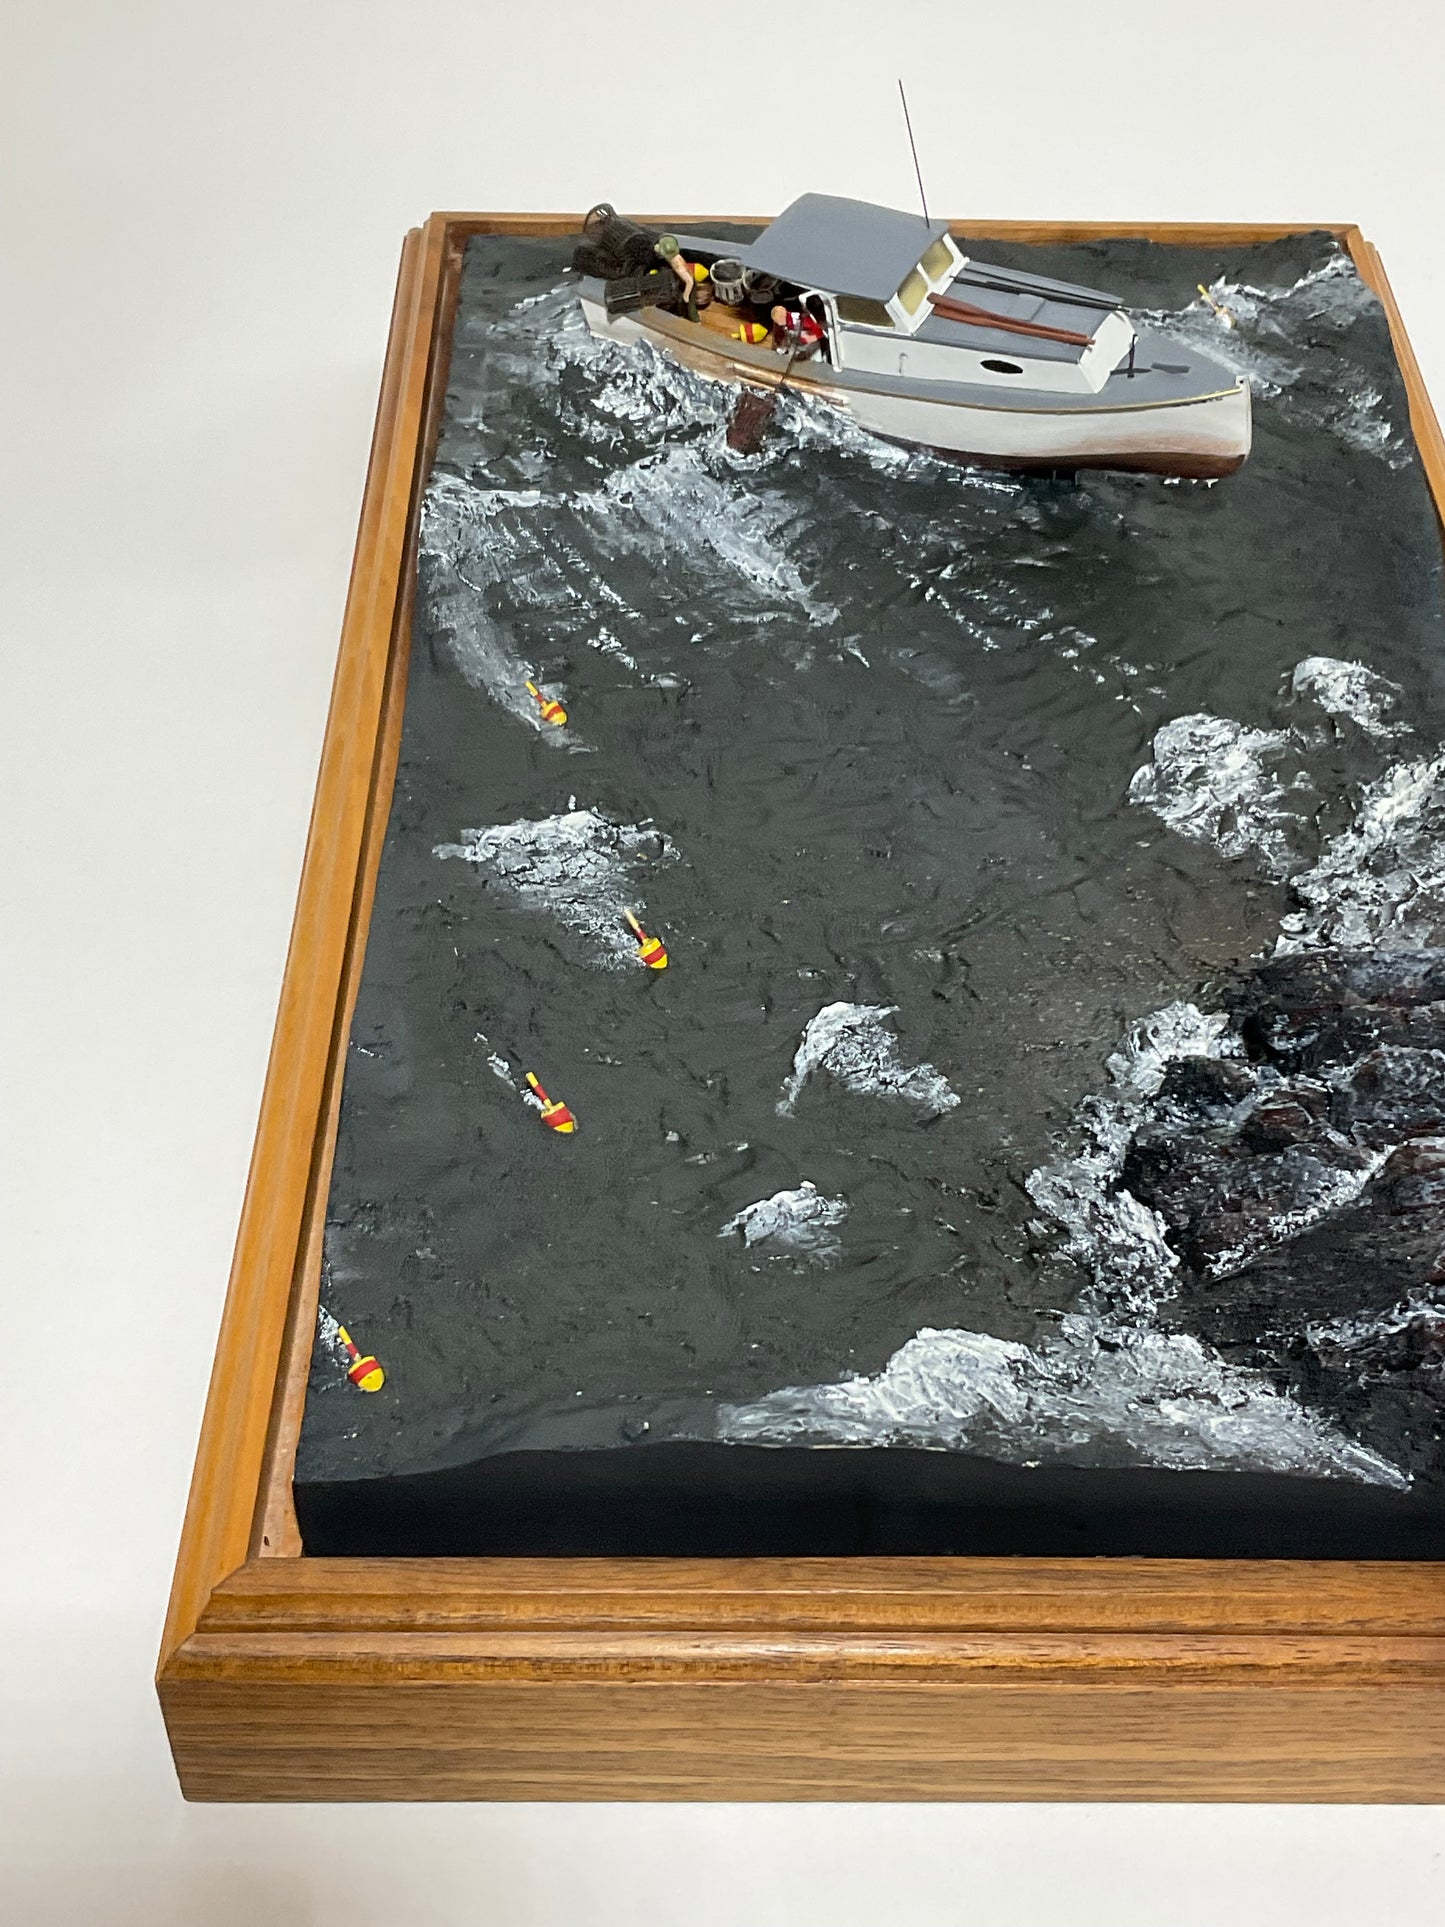 Lobster Boat Diorama Titled "Hauling the Catch"